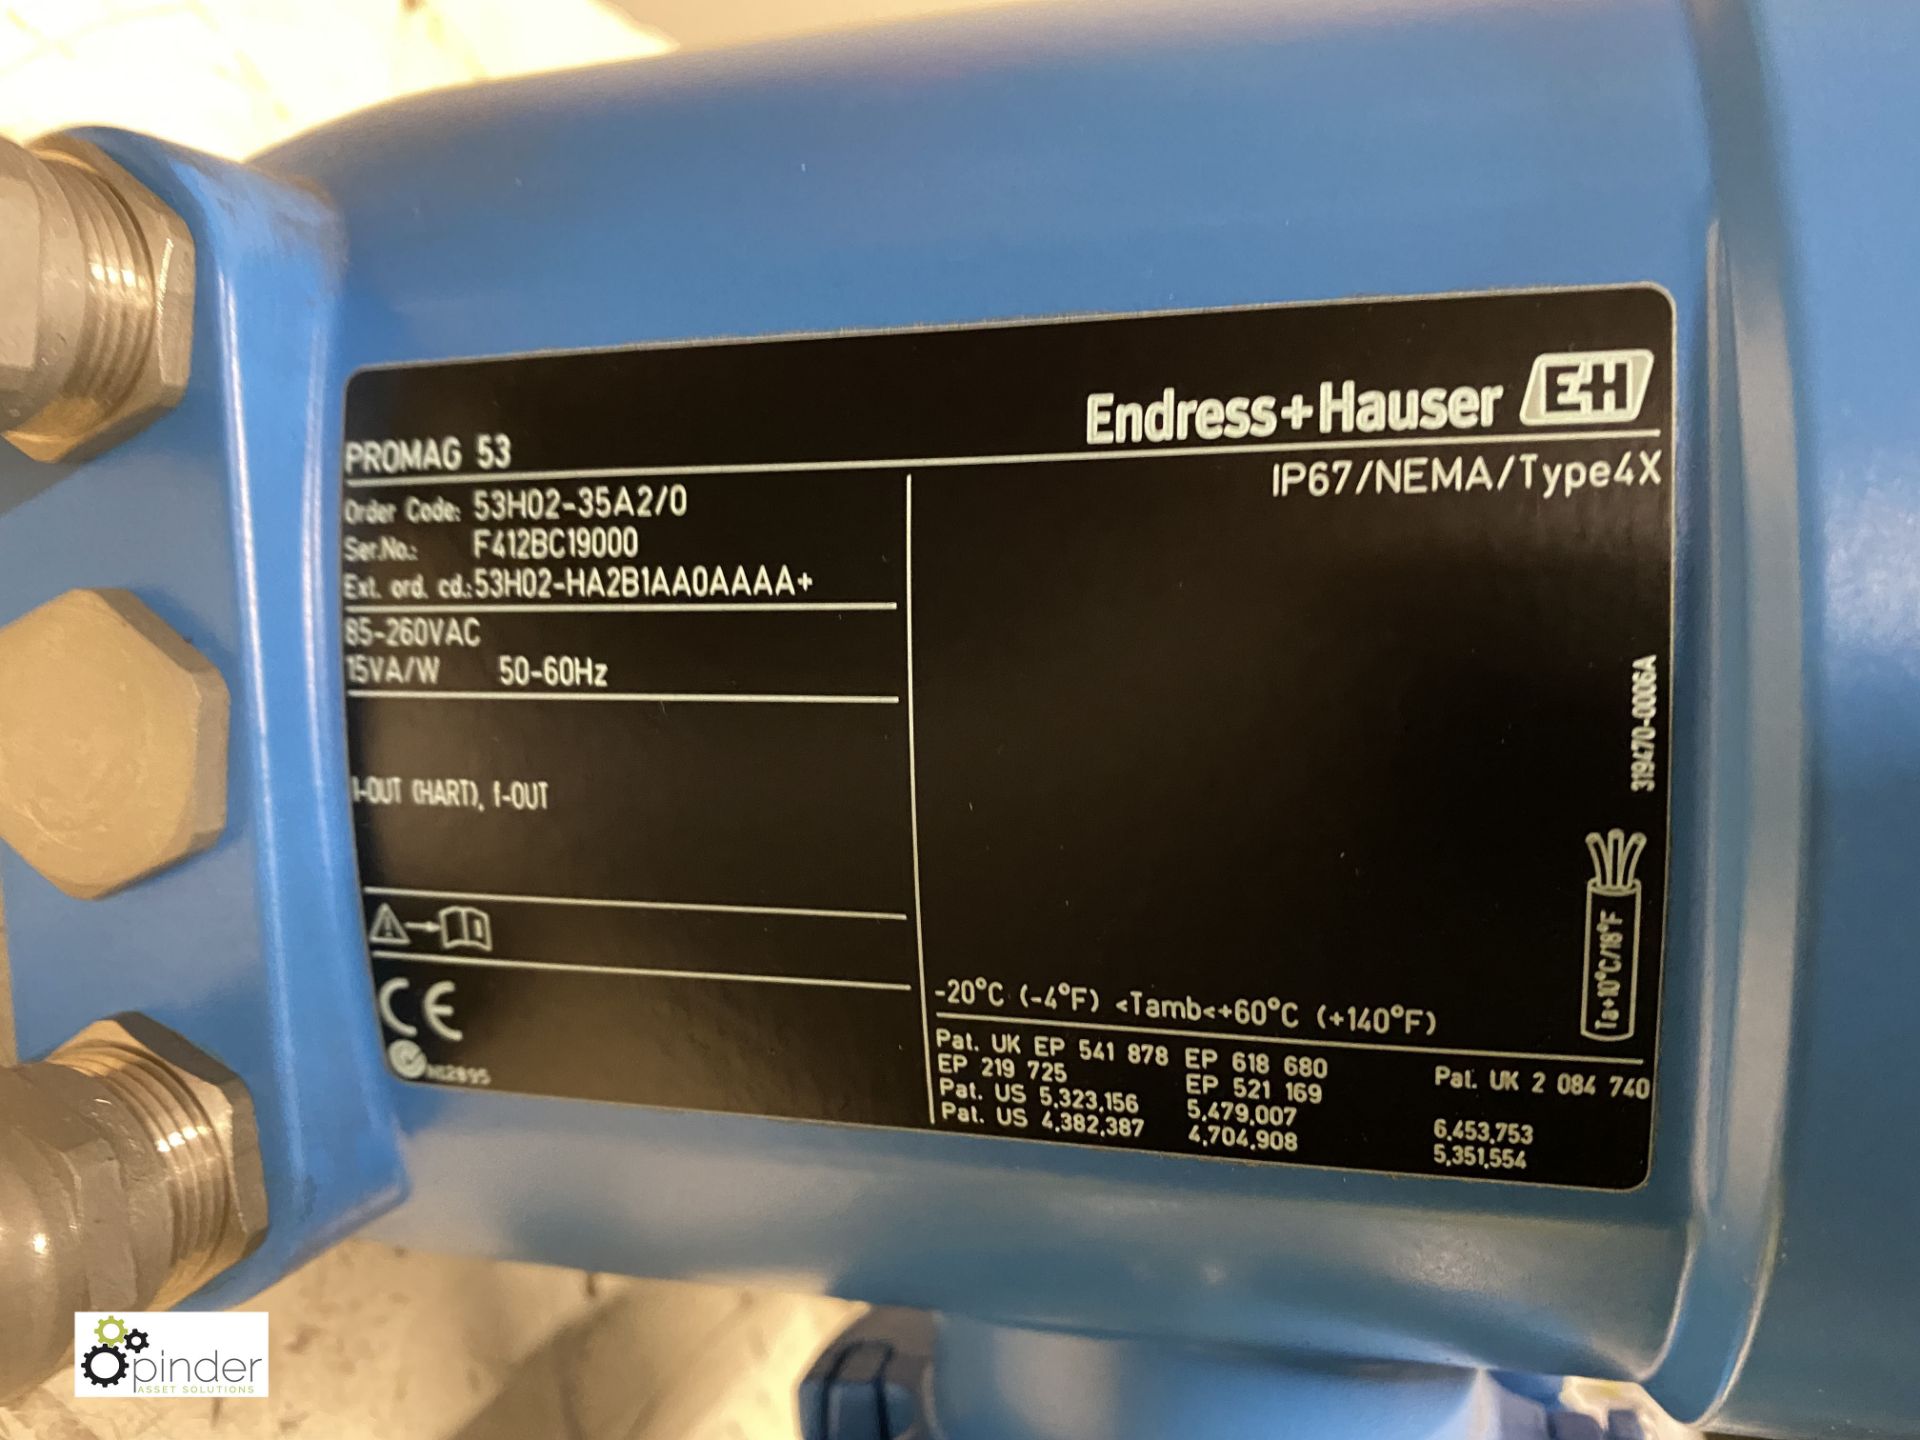 Endress & Hauser Promag H53 53H02-35A2/0, 53H02-HA - Image 3 of 5